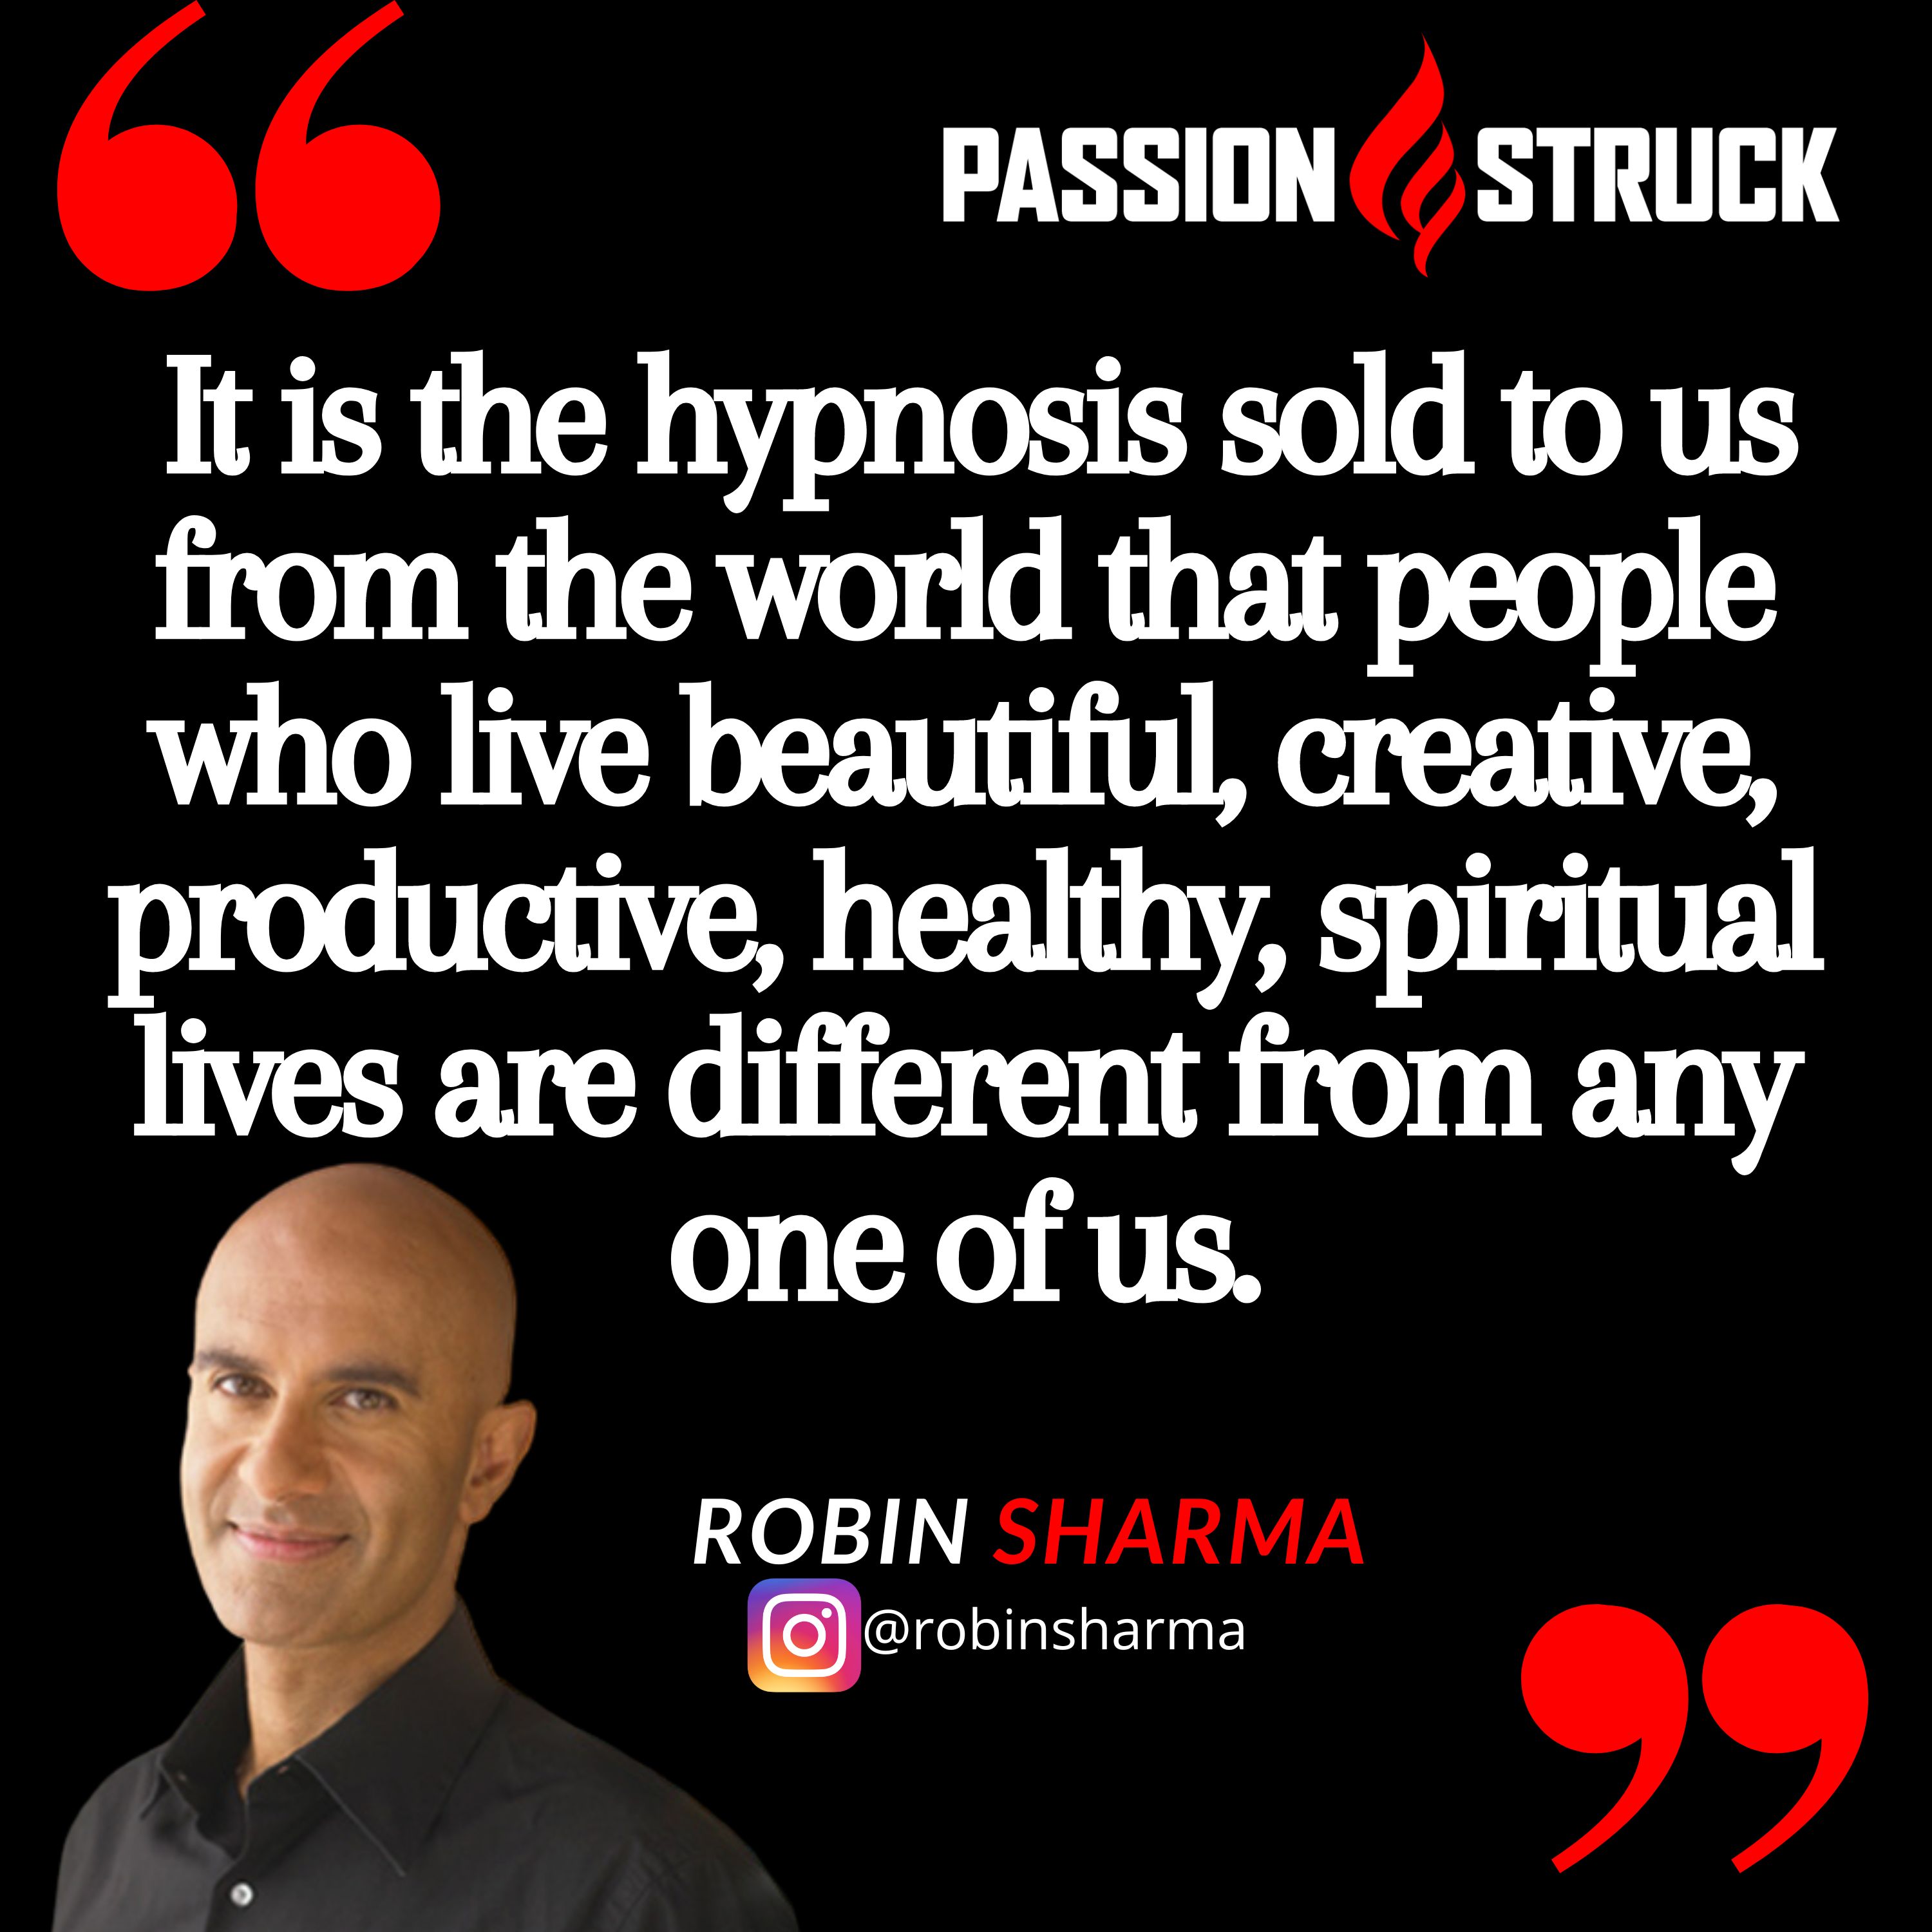 Quote by Robin Sharma from the Passion Struck podcast:  It is the hypnosis sold to us from the world that people who live beautiful, creative, productive, healthy, spiritual lives are different from any one of us.